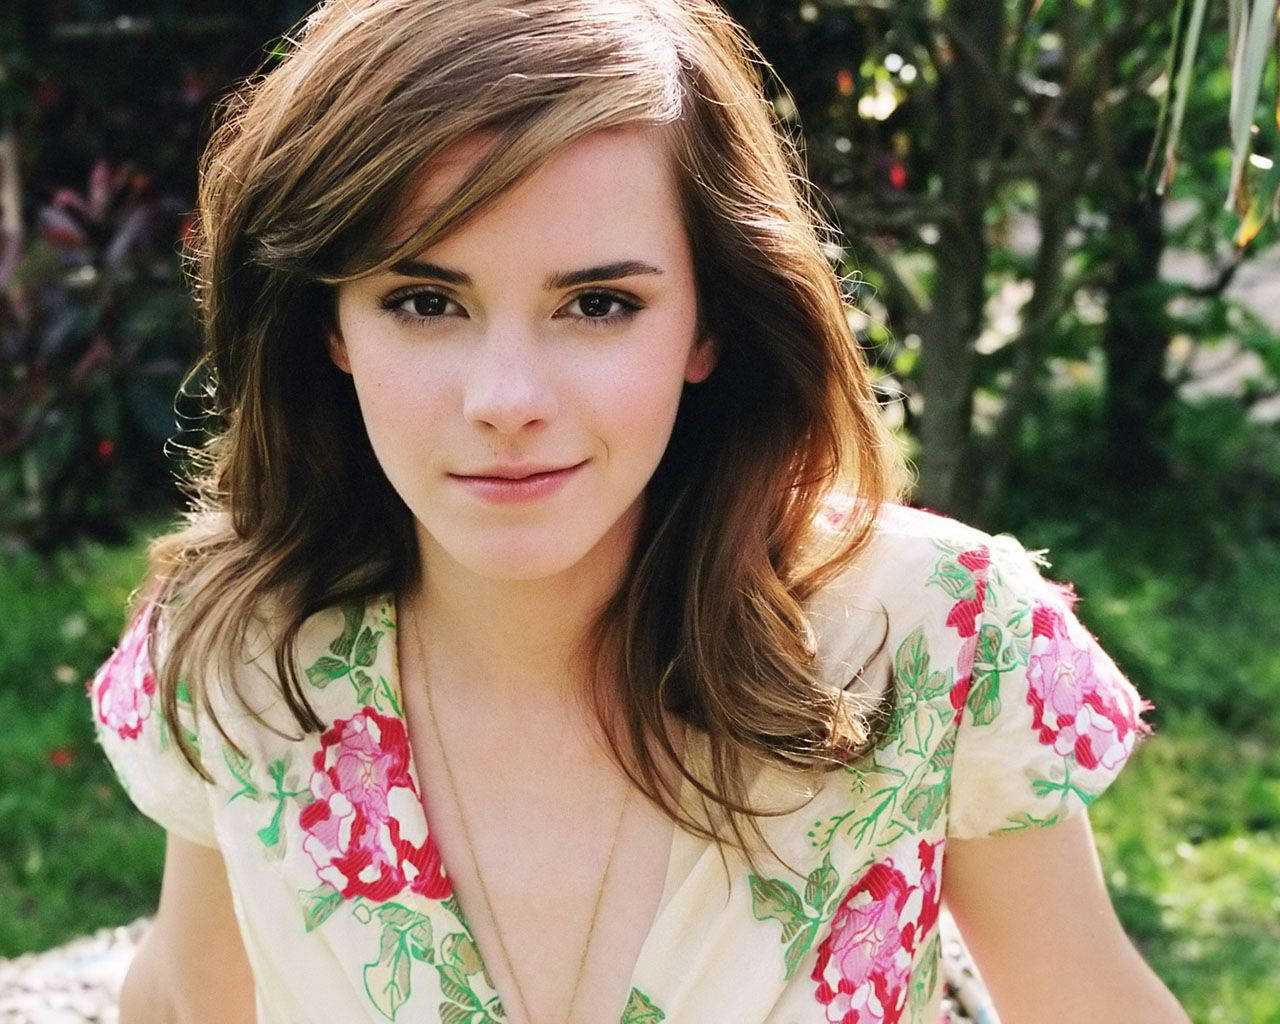 Emma Watson Channeling A Modern-day Princess In A Beautiful Floral Dress Background